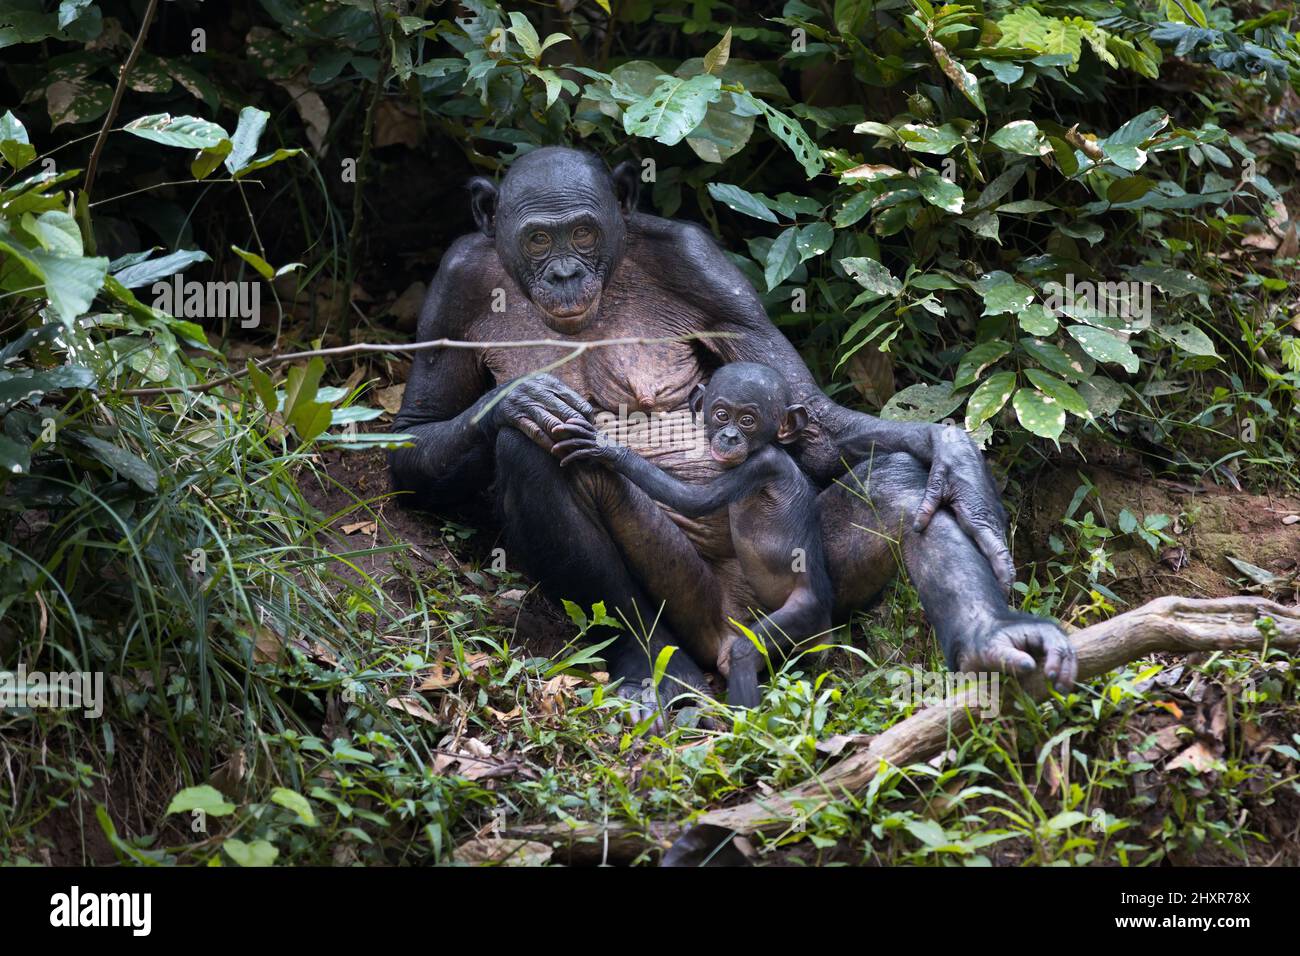 Breastfeeding mother bonobo and her baby in a park in the Democratic Republic of the Congo Stock Photo